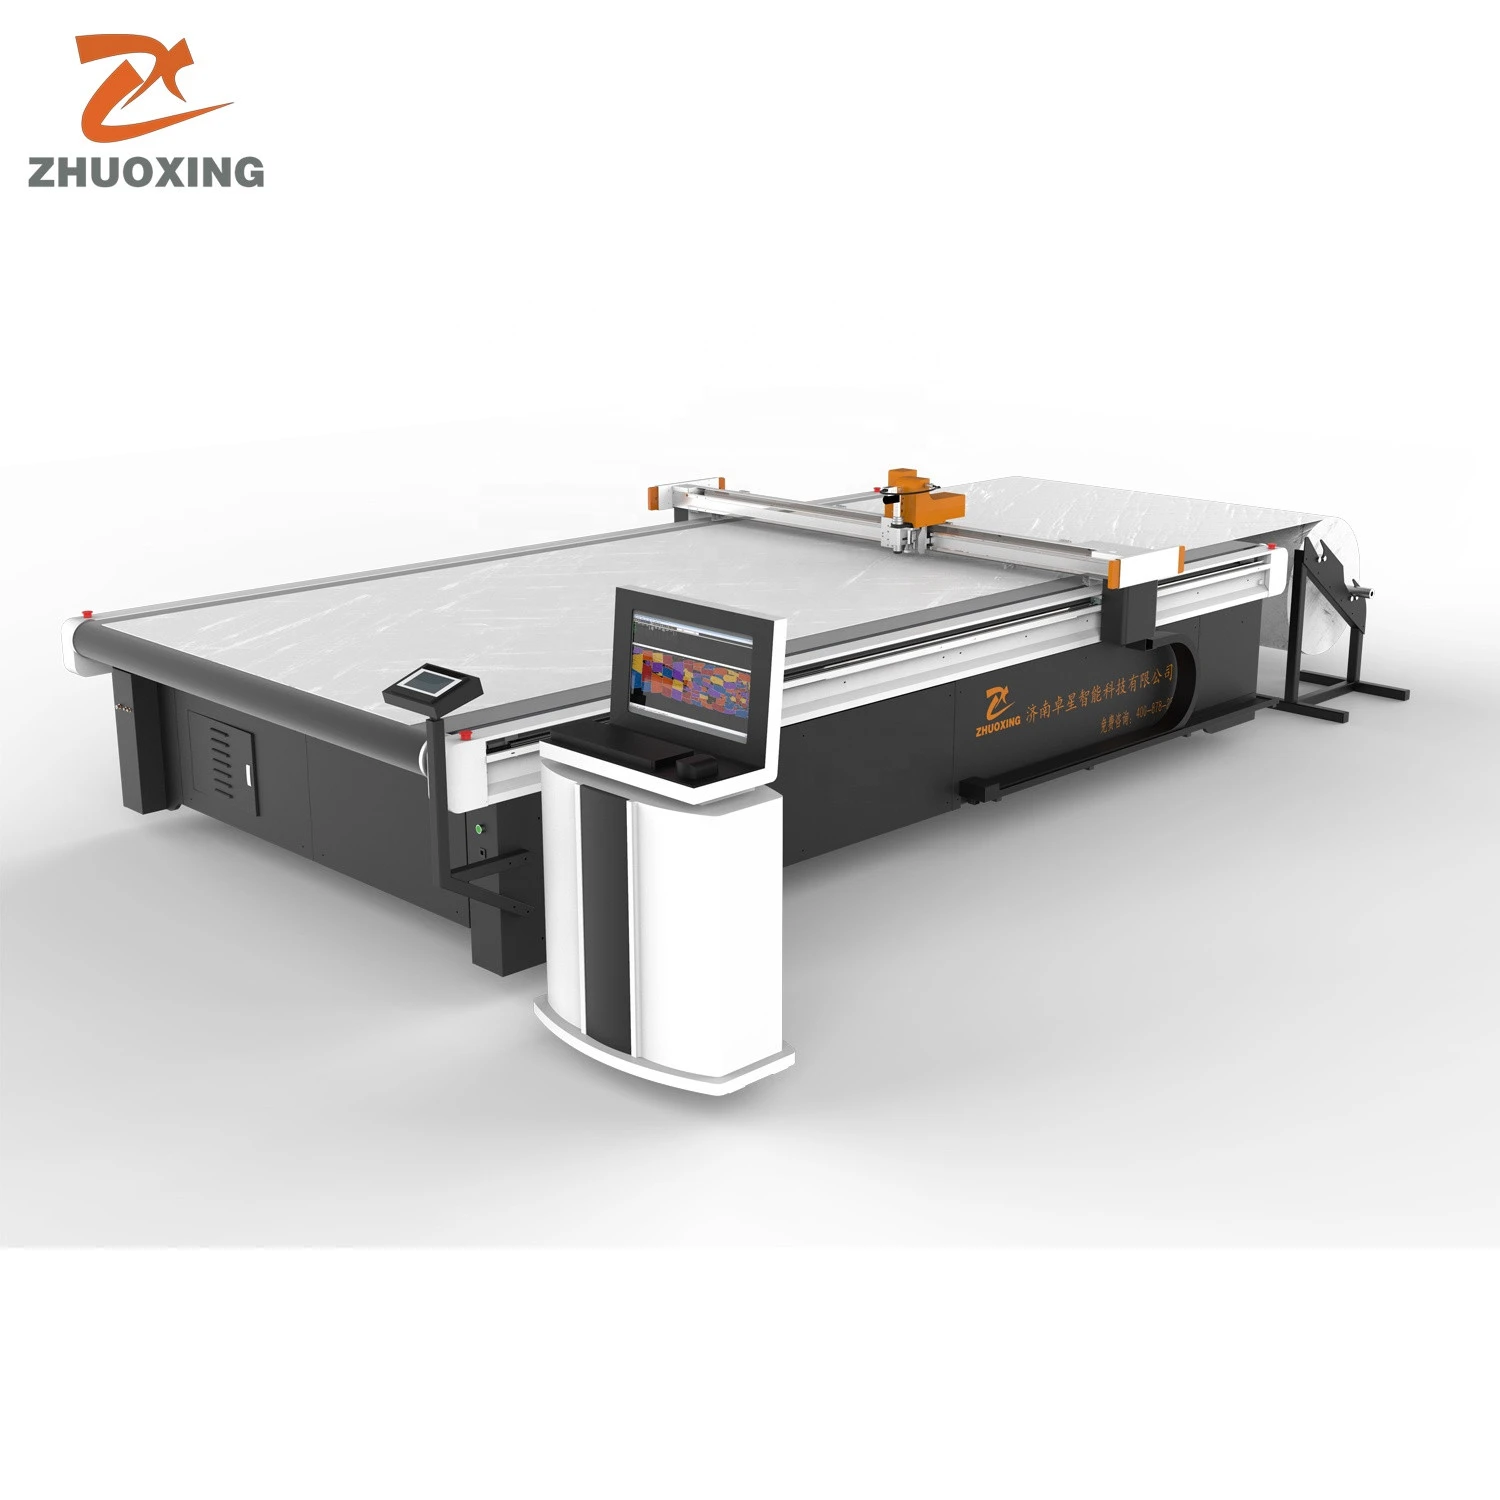 apparel textile cutting machine for garment customization production and pattern making